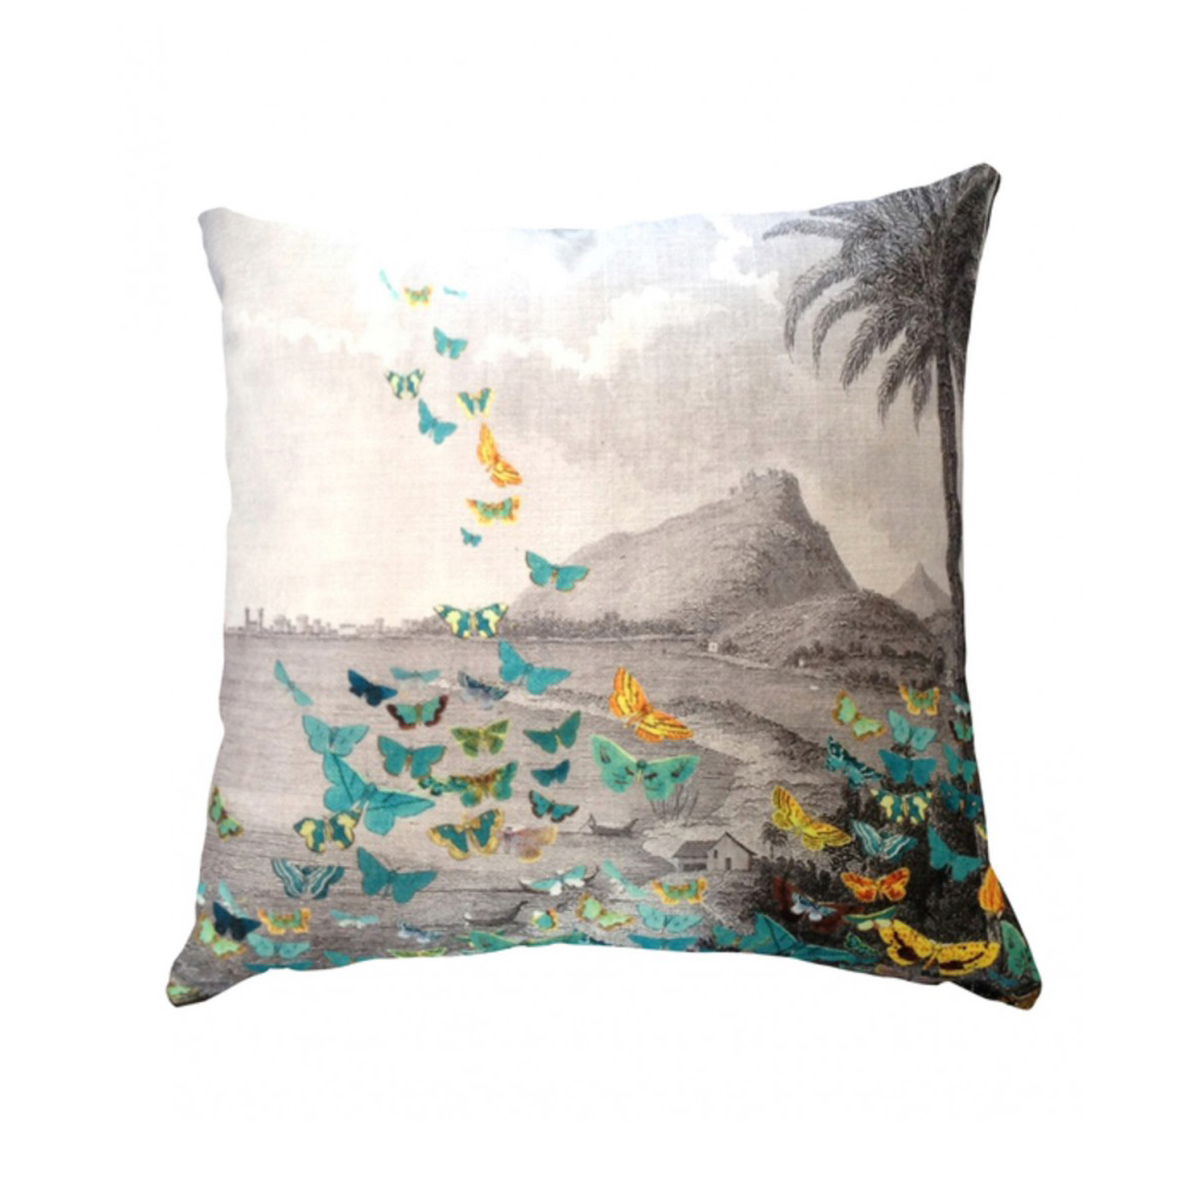 Tropical Butterfly Teal Storm Cushion